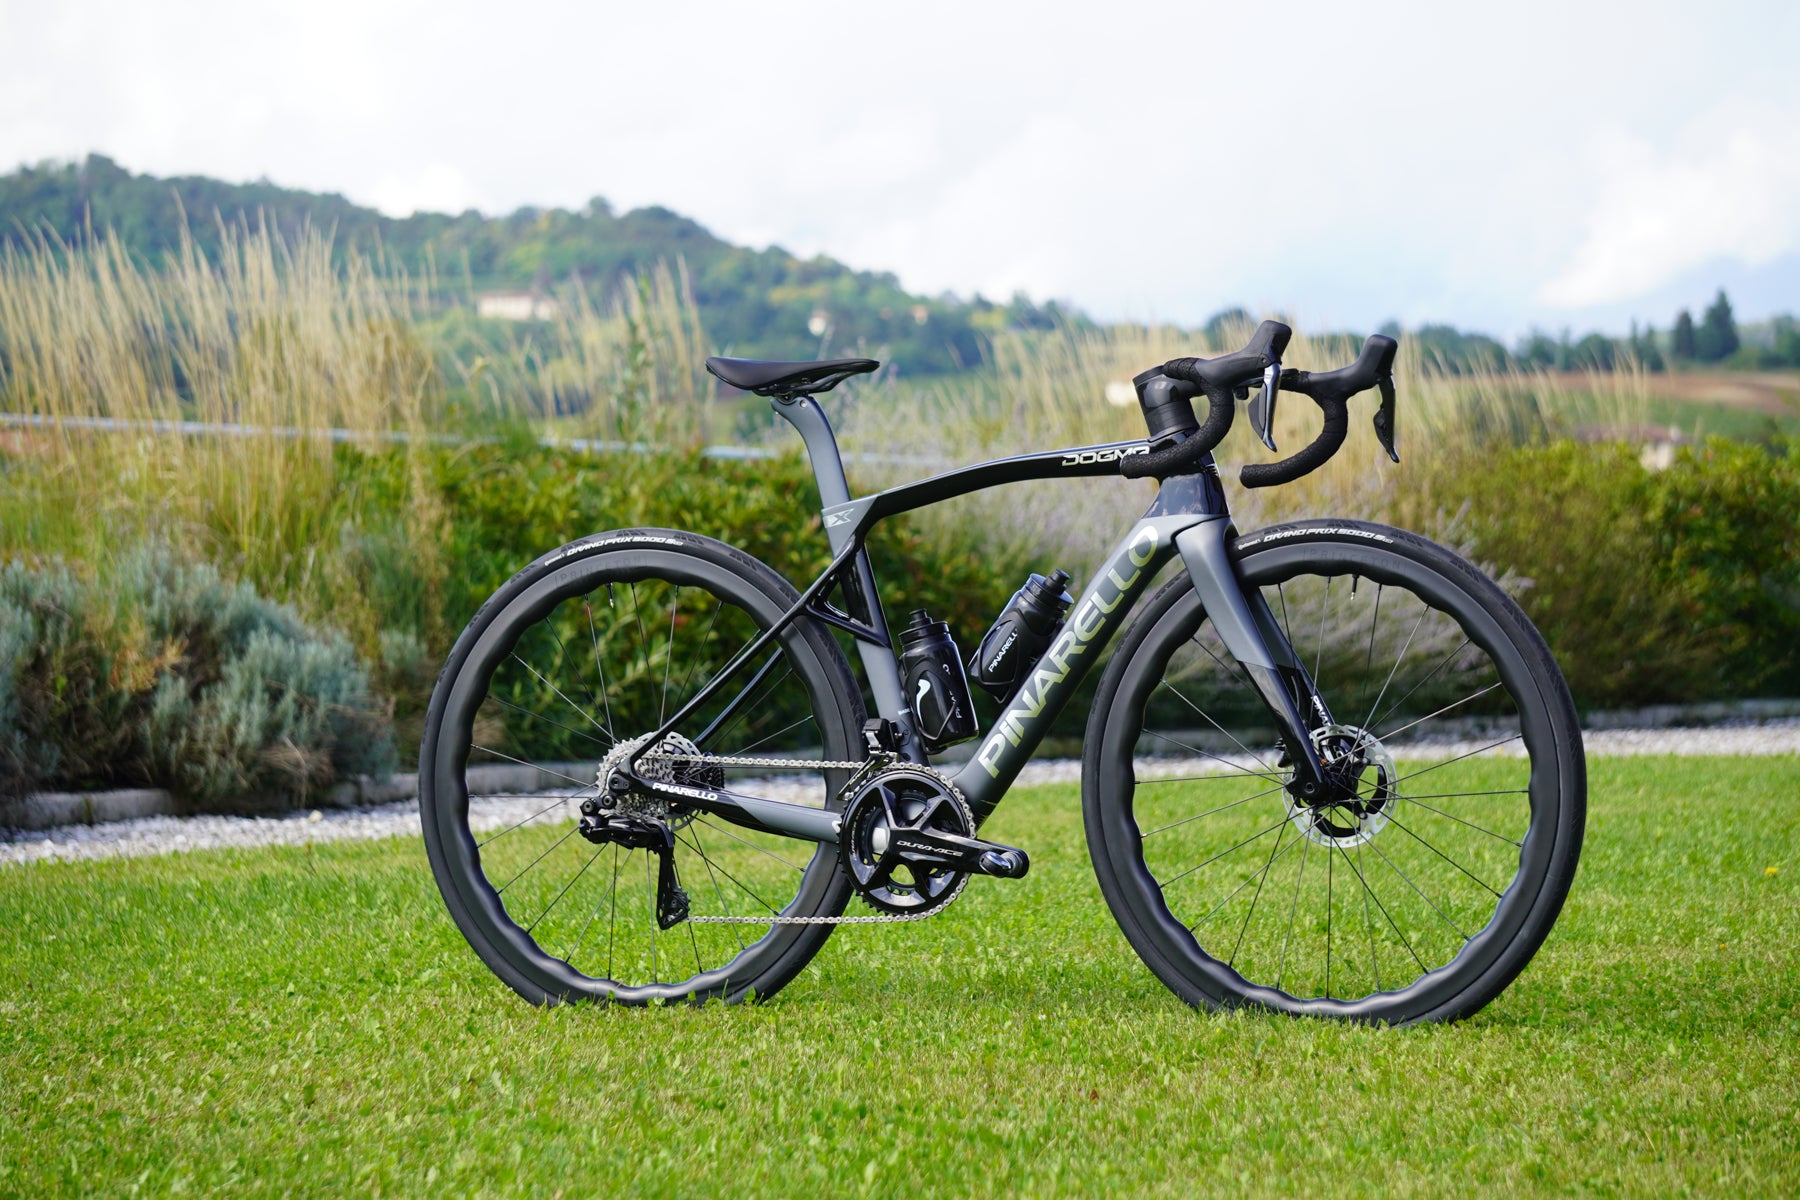 Pinarello Dogma X first ride review: A race bike with the edge